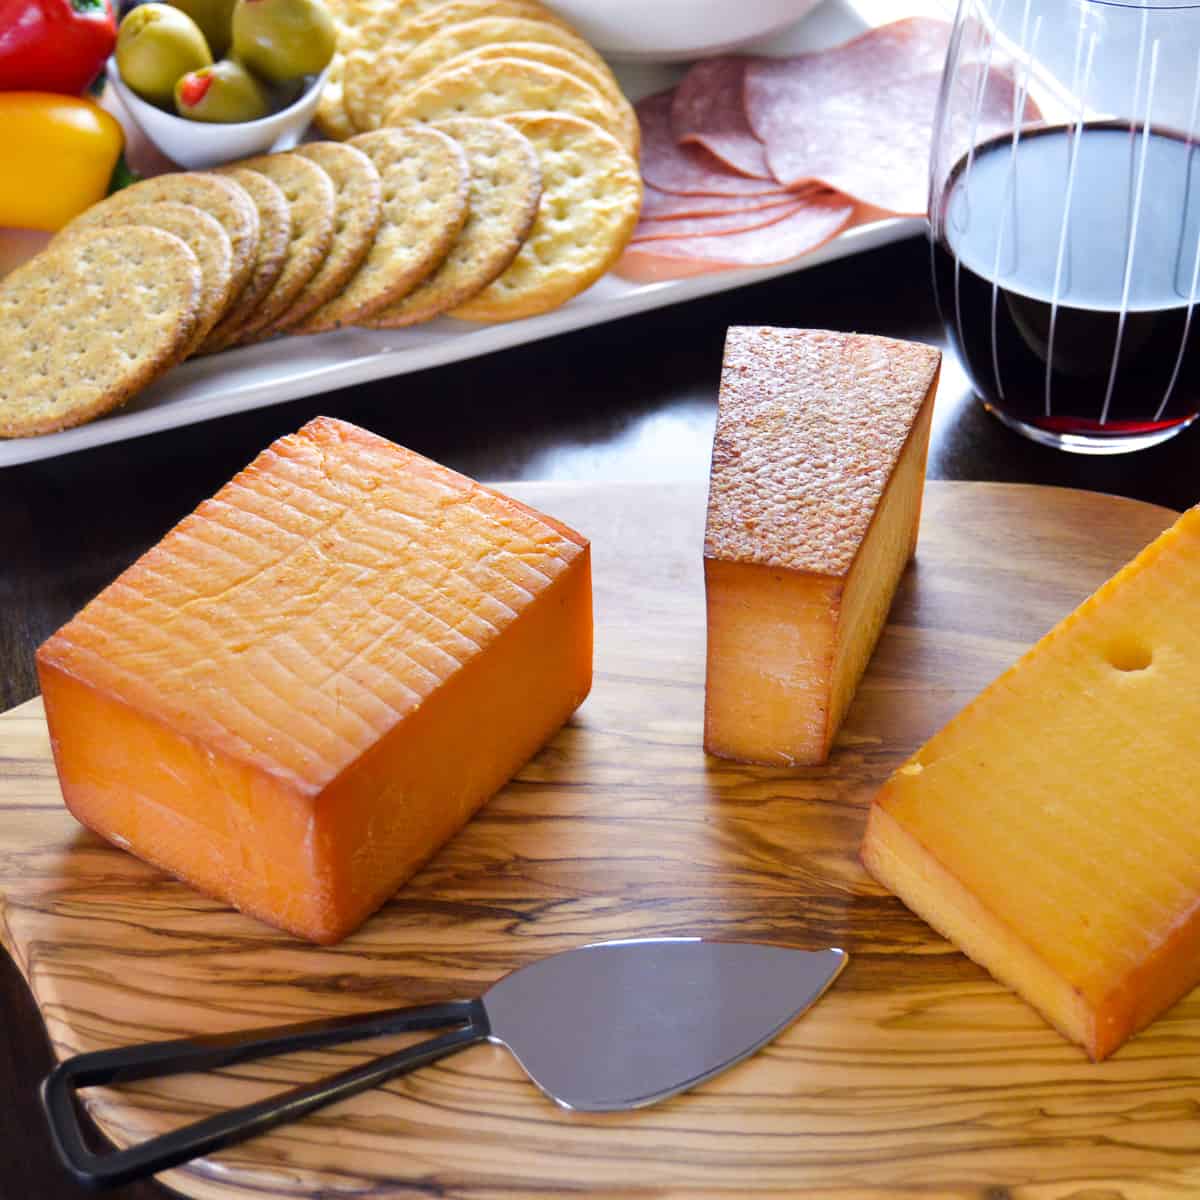 Cold Smoked Blocks of Cheese. Cheddar, Gouda, Gruyere & plate of crackers, olives, peppers, grapes, salami in background with glass of red wine